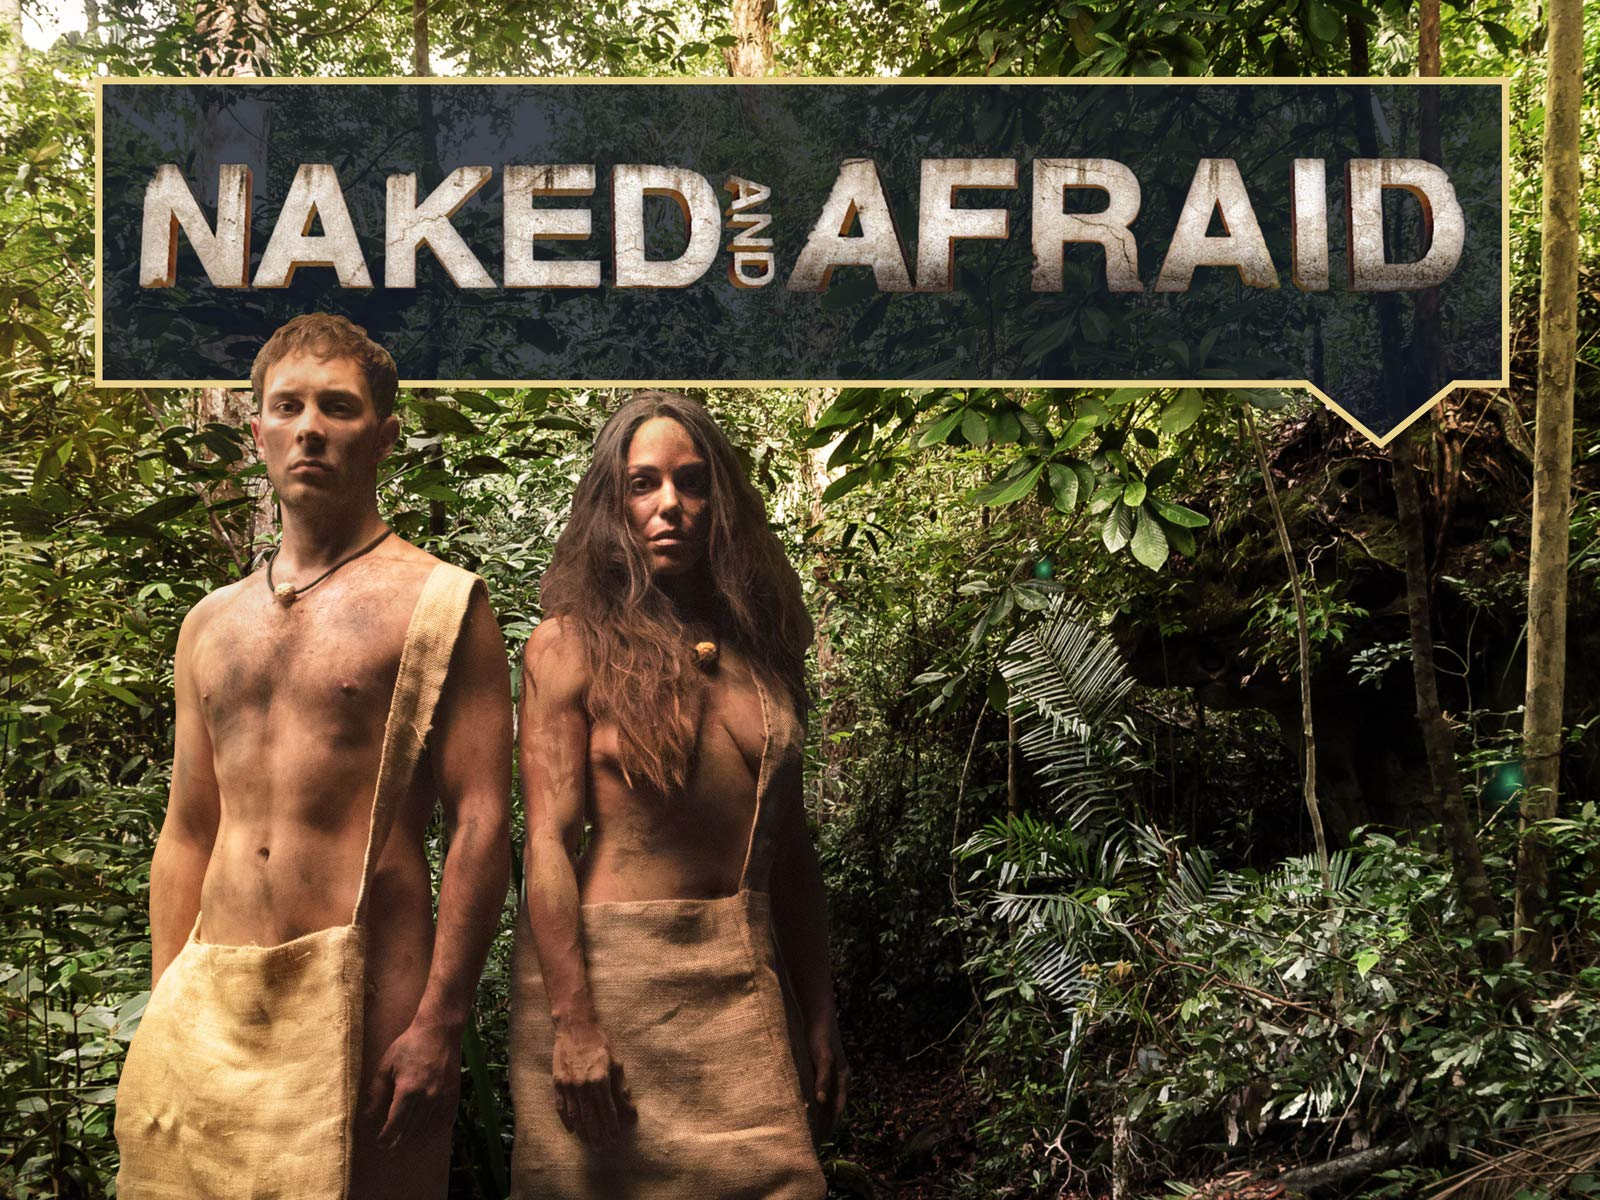 Naked and afraid scripted